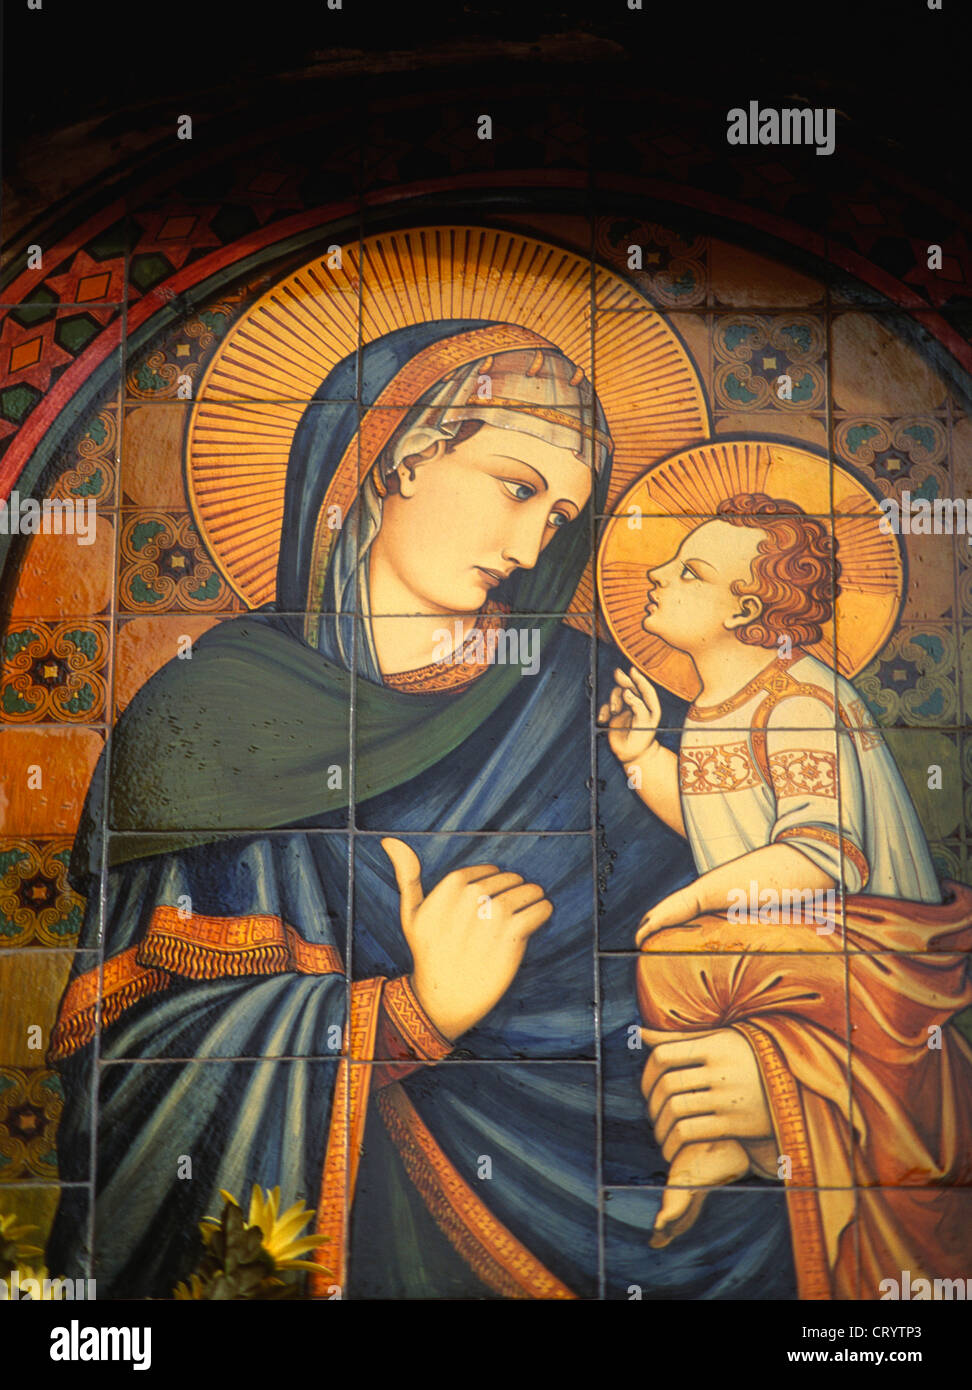 Italy, Umbria, Assisi, Madonna and the Child, religious image, Stock Photo